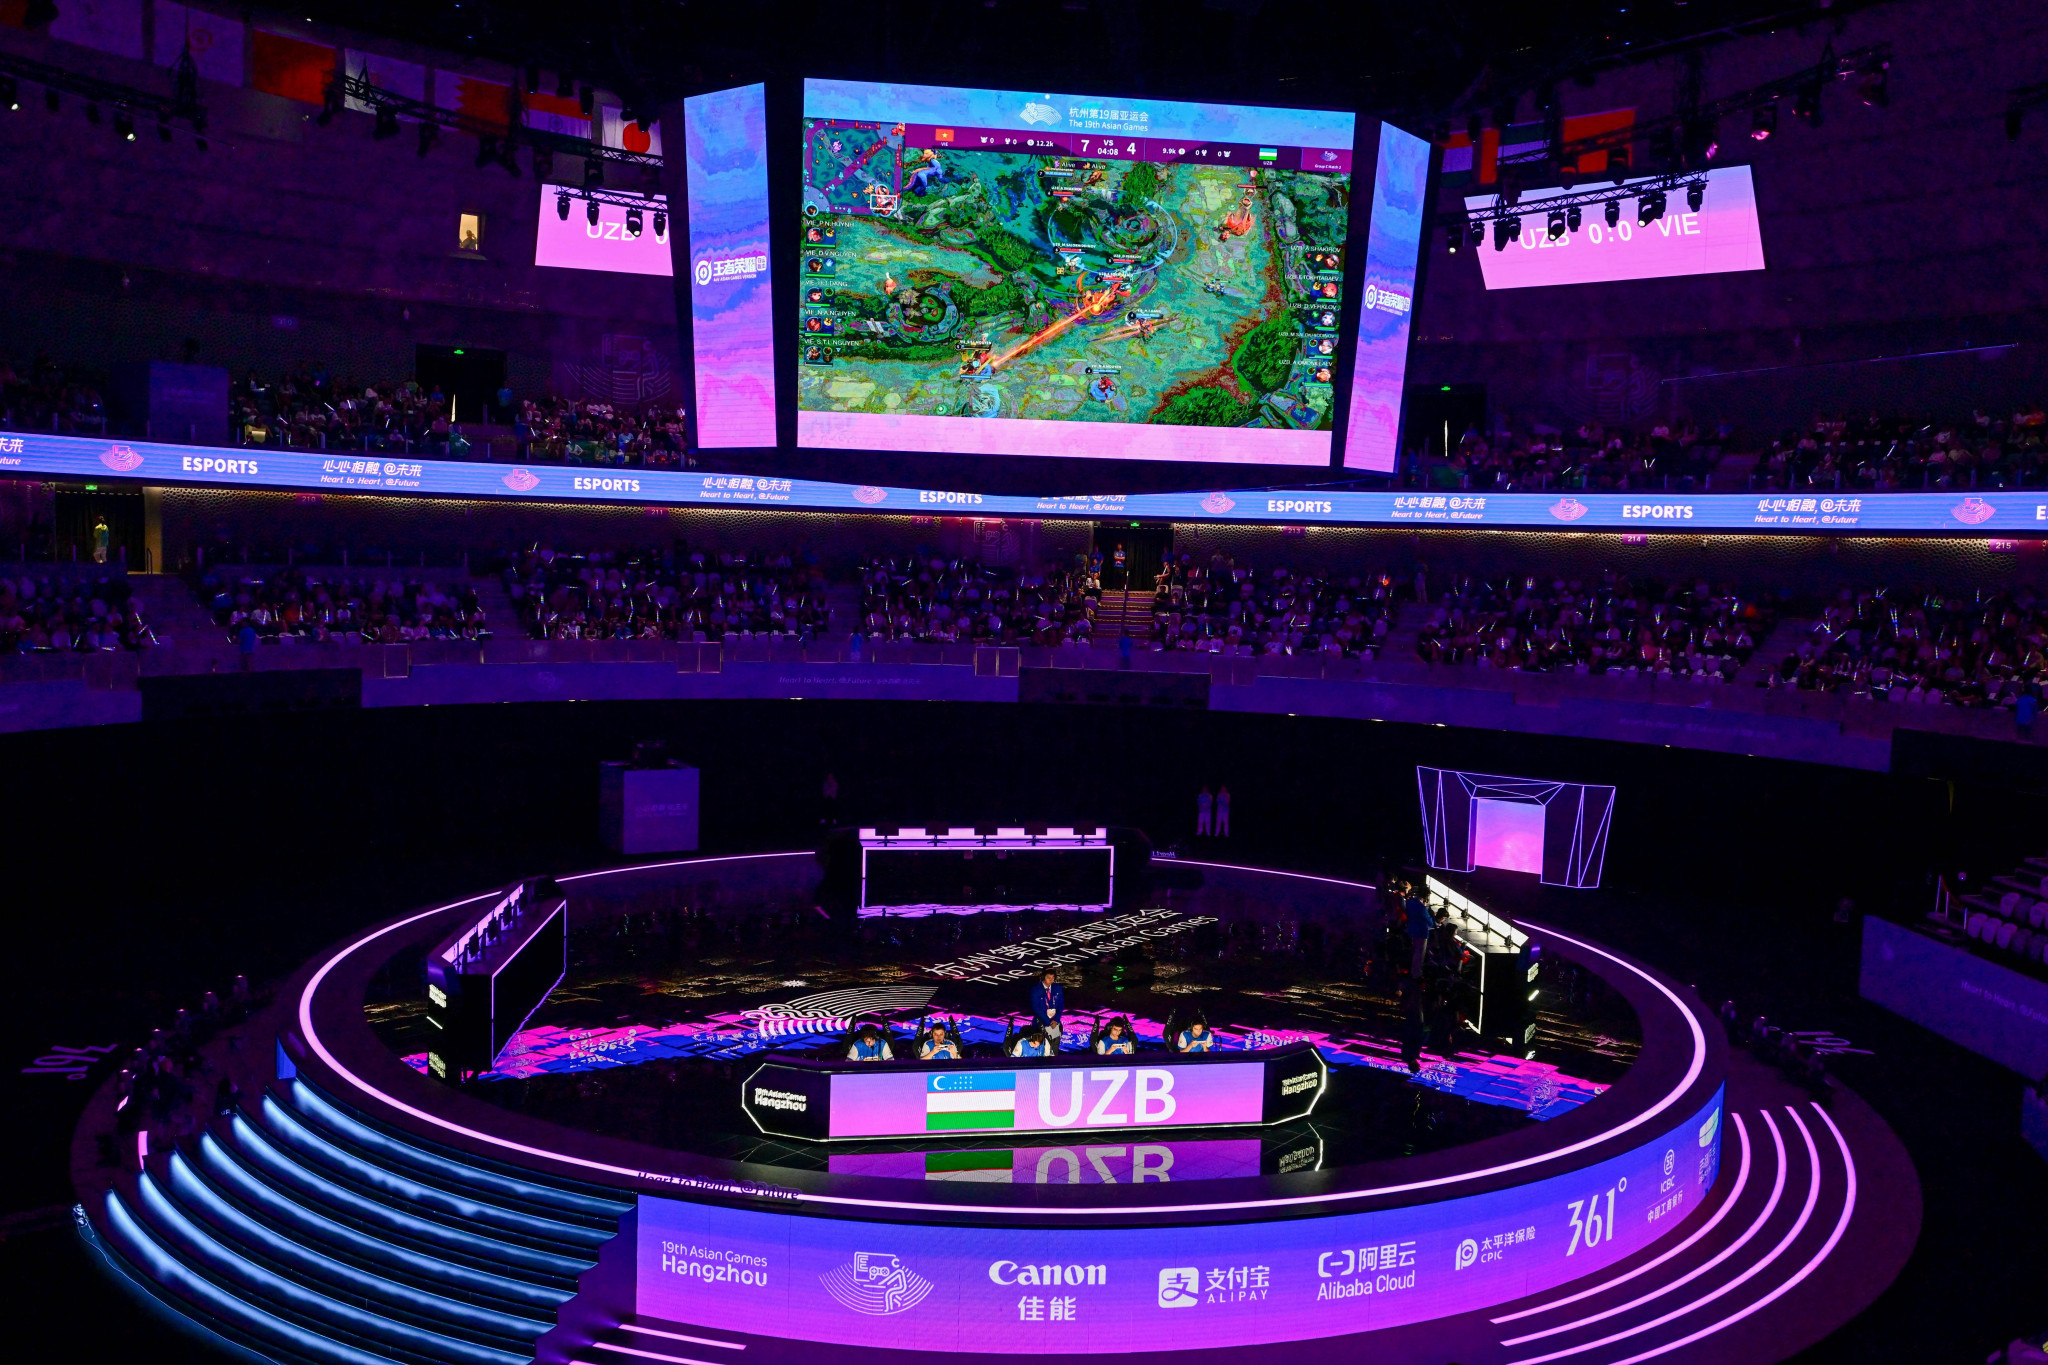 Esports competitions begin at Hangzhou 2022 in official Asian Games medal event debut